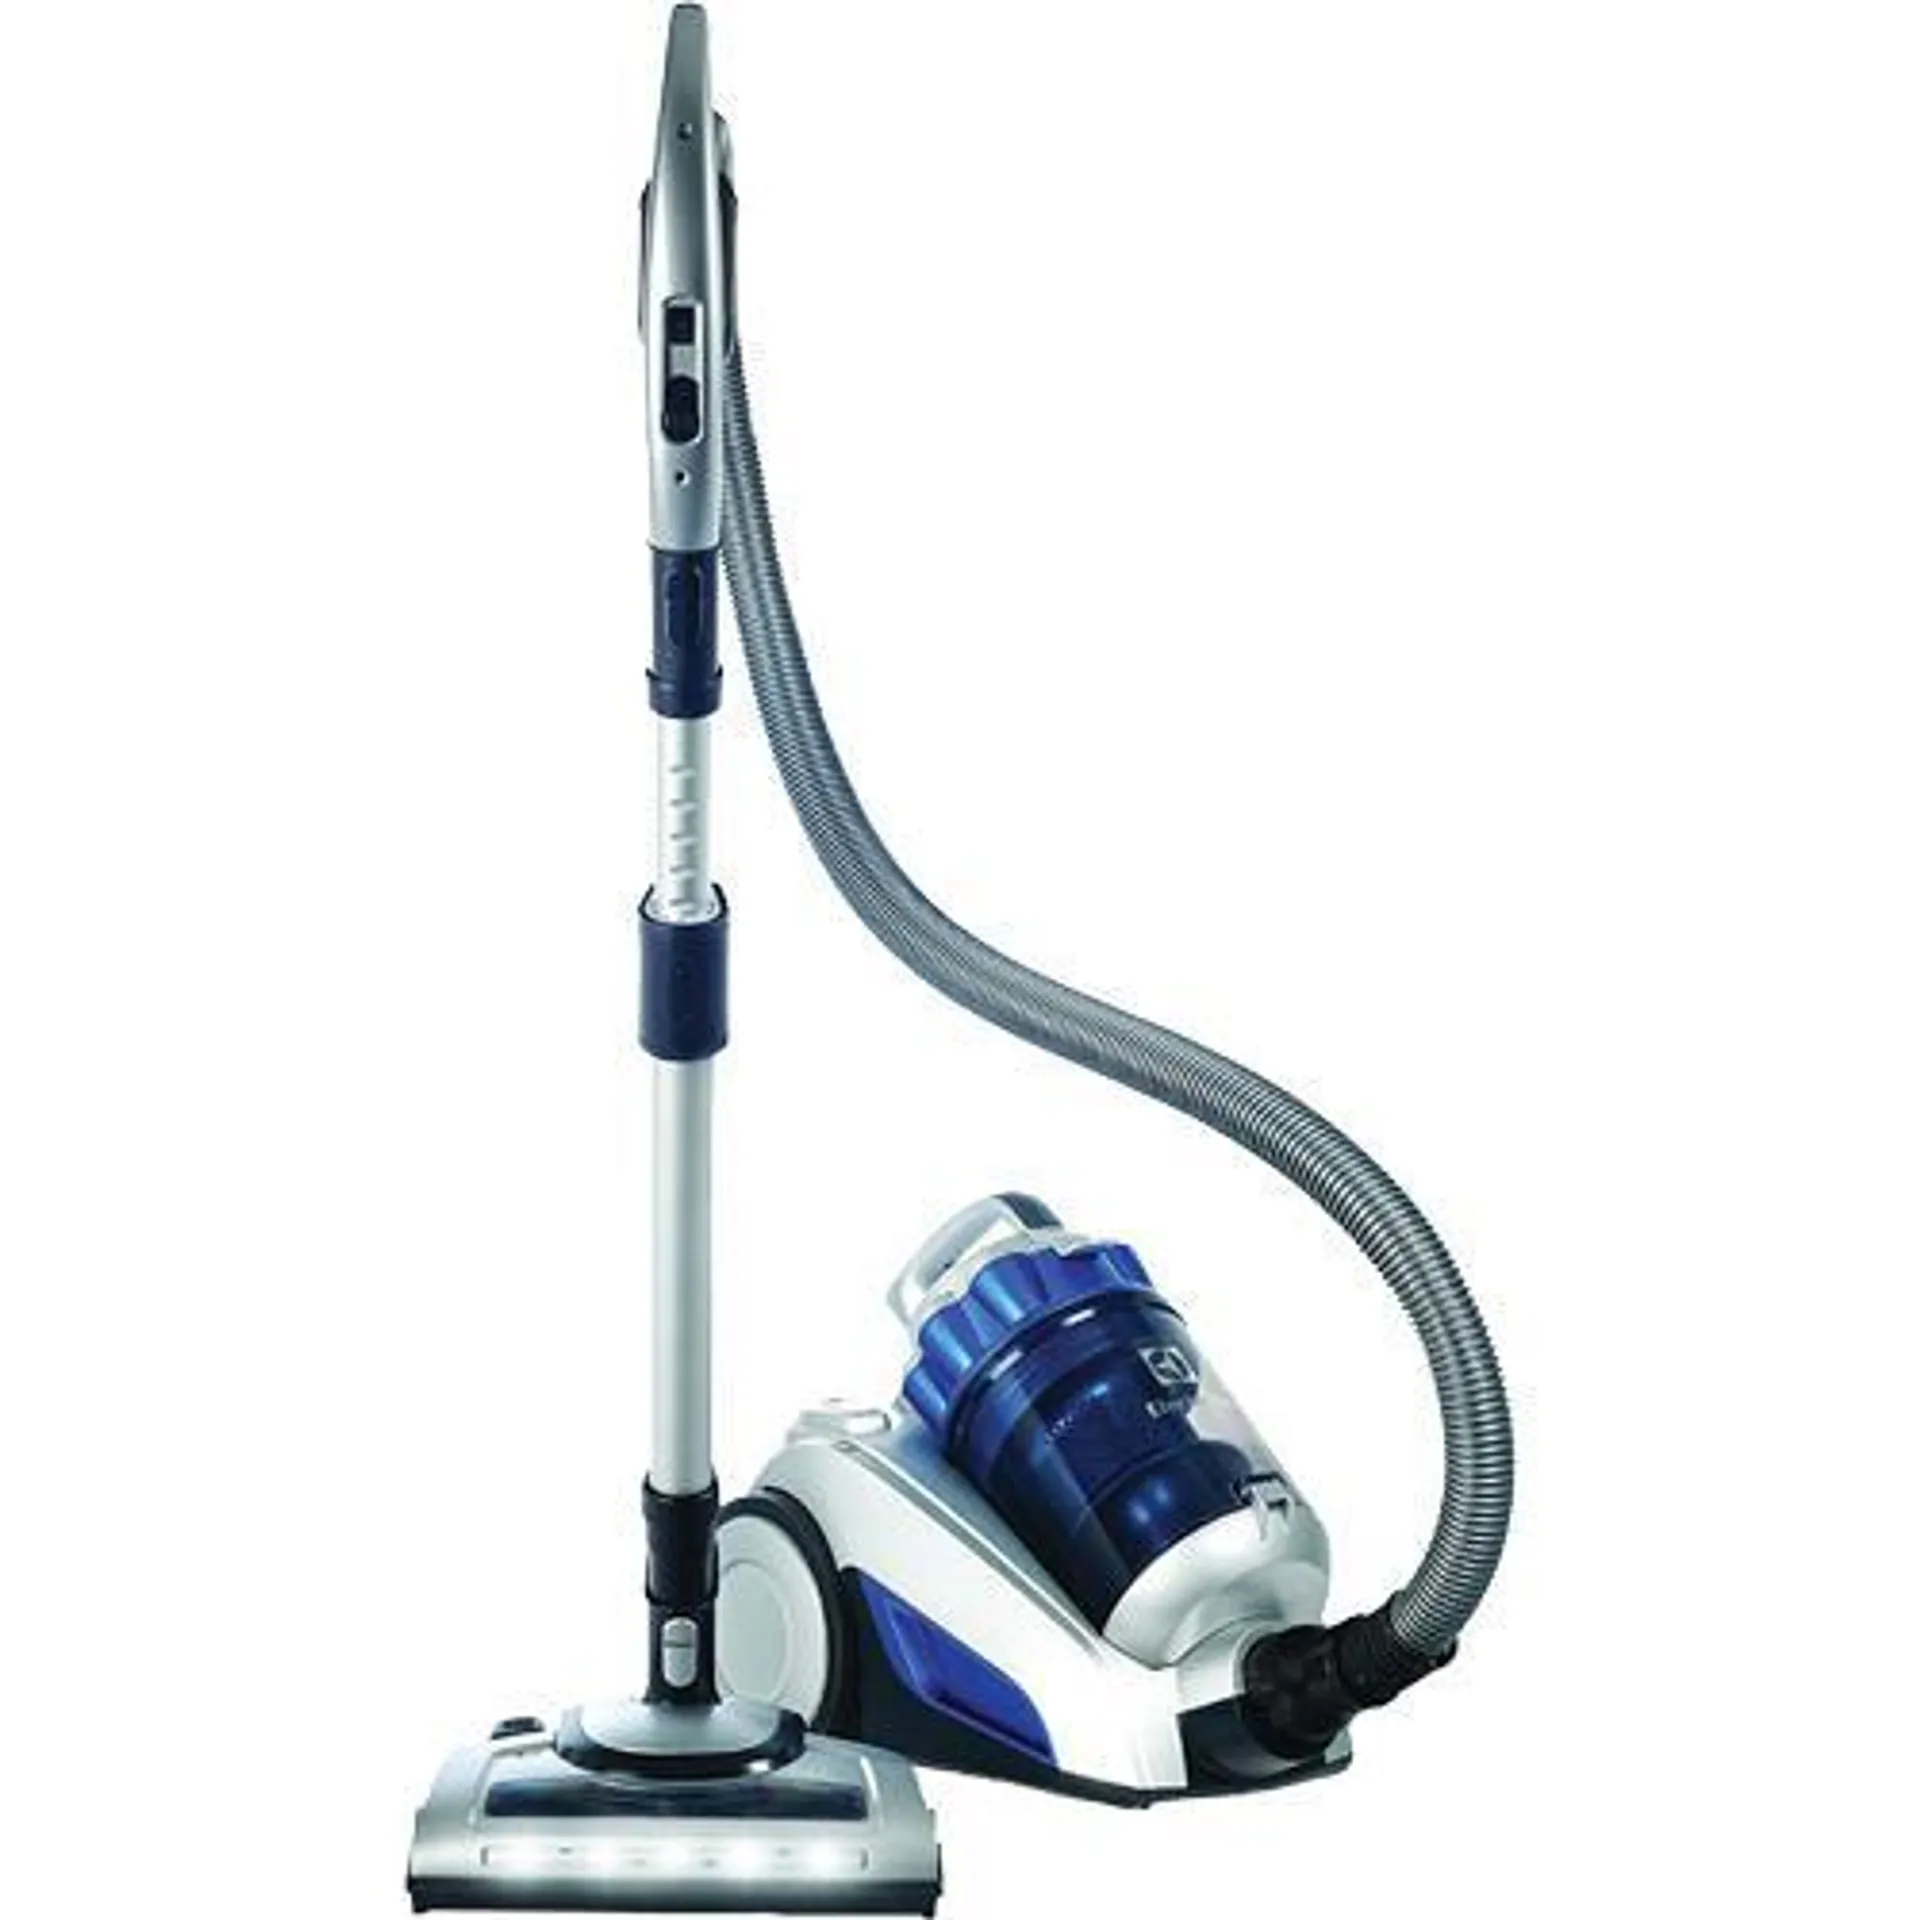 Versatility All Floors Bagless Canister Vacuum